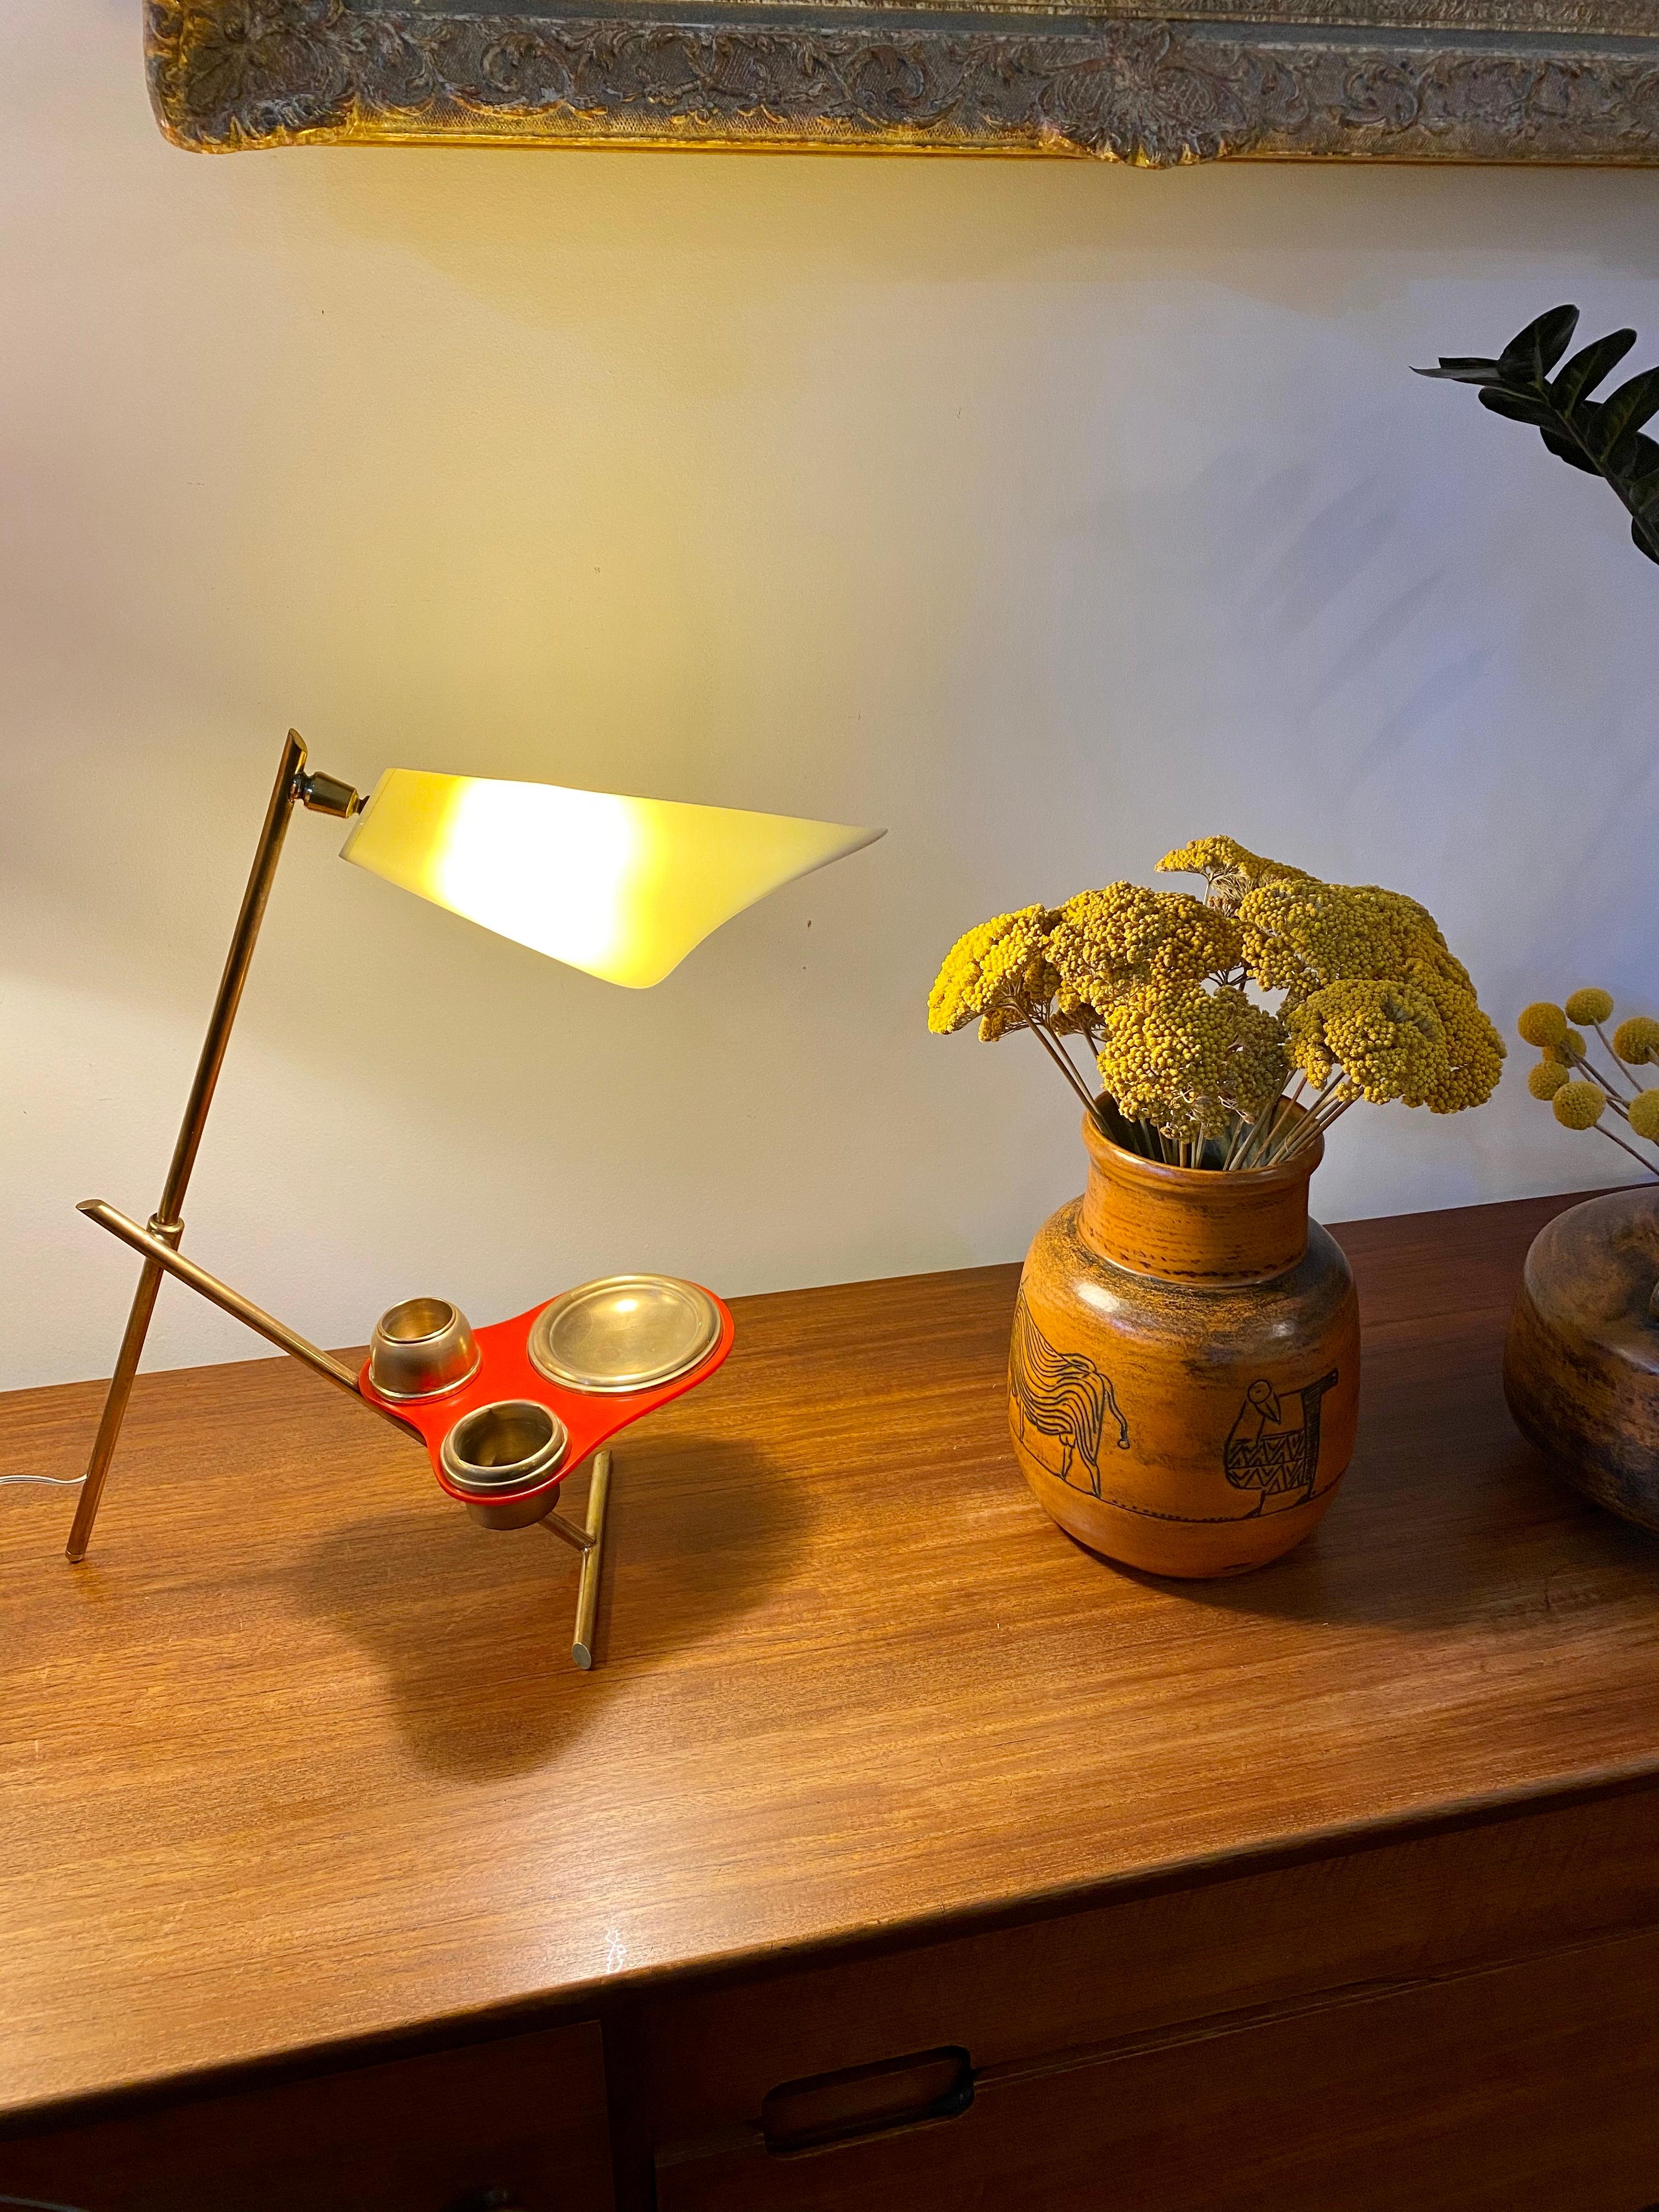 An entirely original midcentury Italian table lamp with brass stand and desk-organiser receptacles (circa 1950s). Incredibly stylish and modern, this chic table / desk lamp puts the spotlight on those things important to you. It has a dashing red